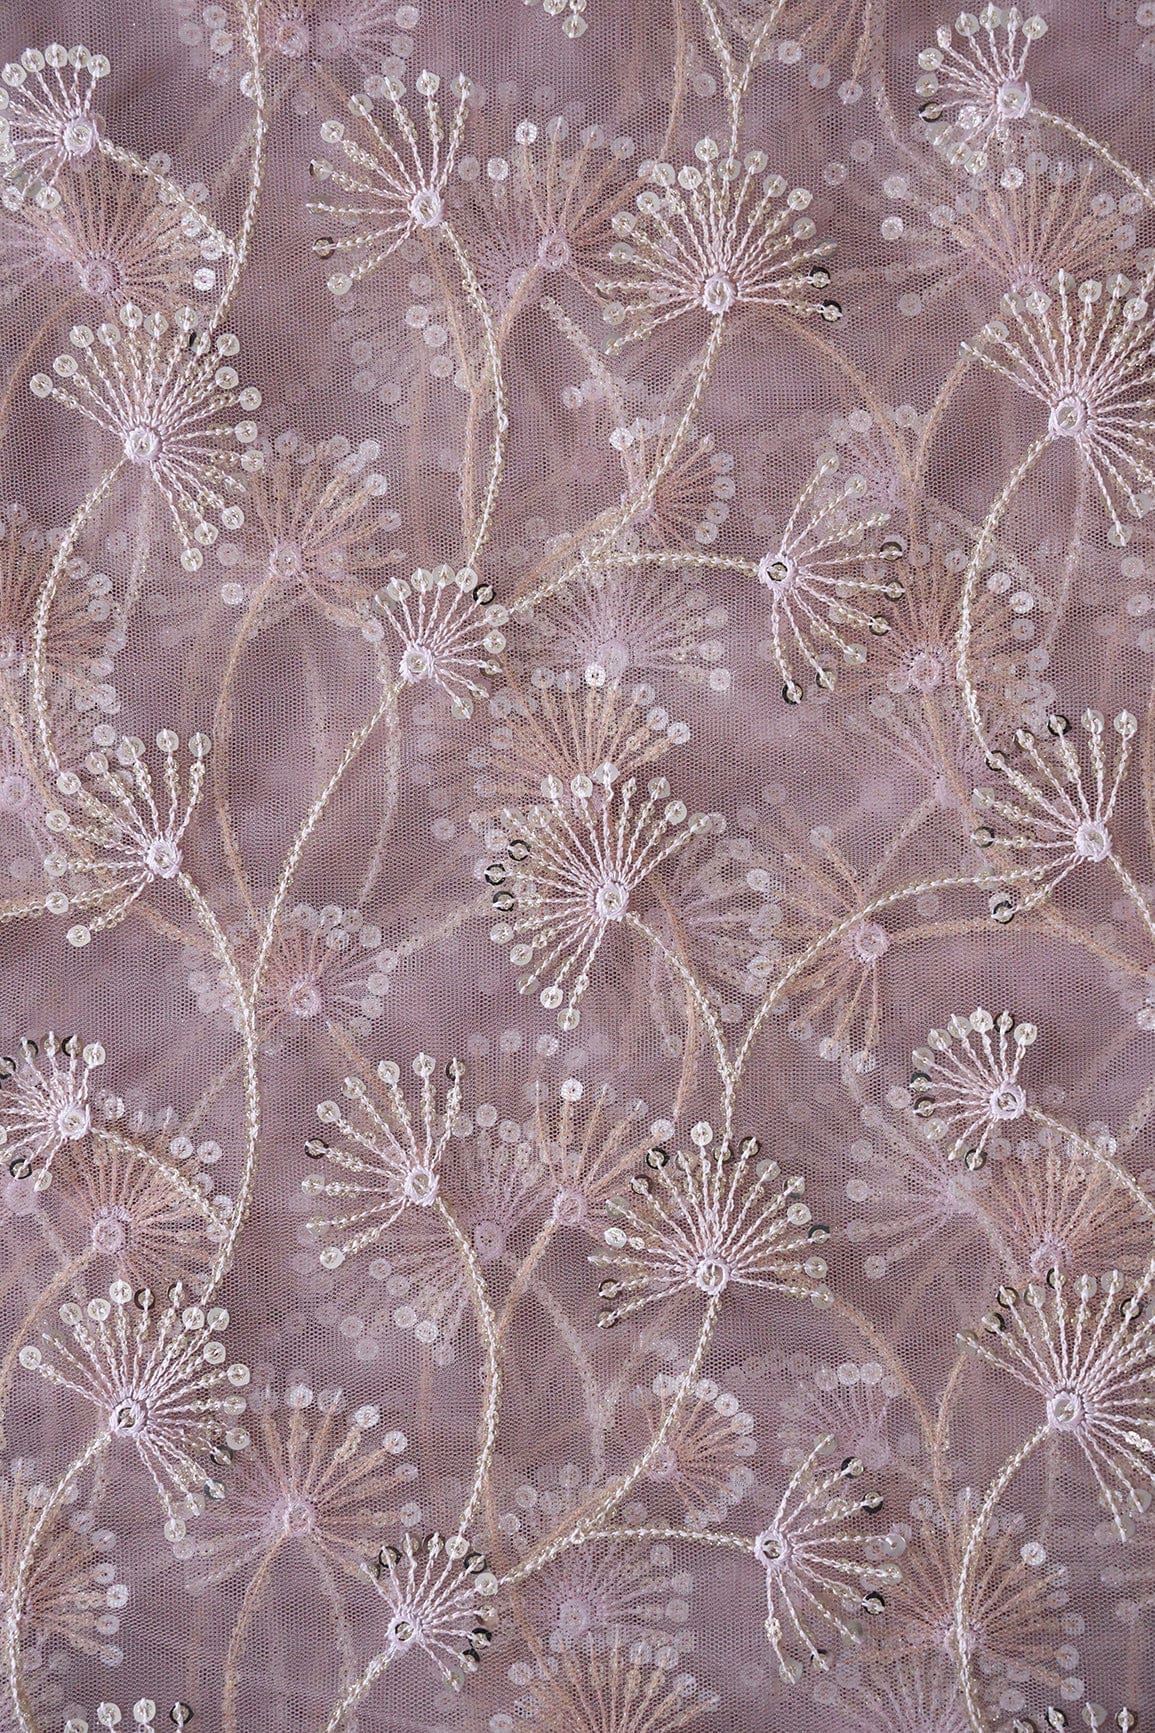 doeraa Embroidery Fabrics Mauve Thread With Gold And Silver Sequins Floral Embroidery On Mauve Soft Net Fabric